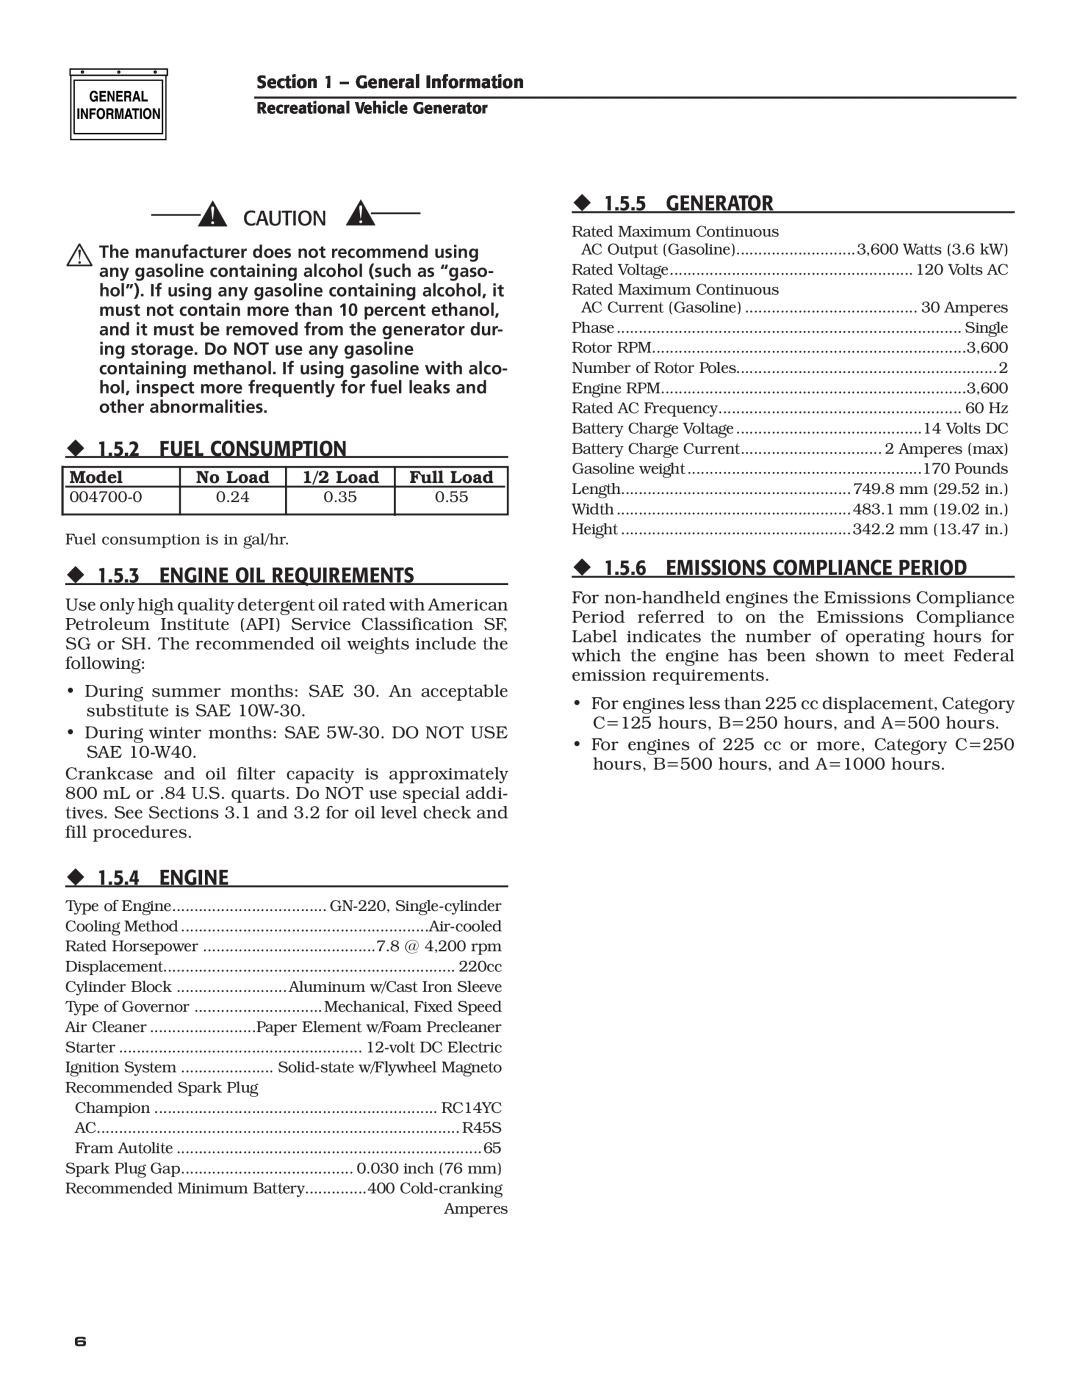 Generac Power Systems 004700-00 owner manual ‹ 1.5.5 GENERATOR, ‹ 1.5.2 FUEL CONSUMPTION, ‹ 1.5.3 ENGINE OIL REQUIREMENTS 